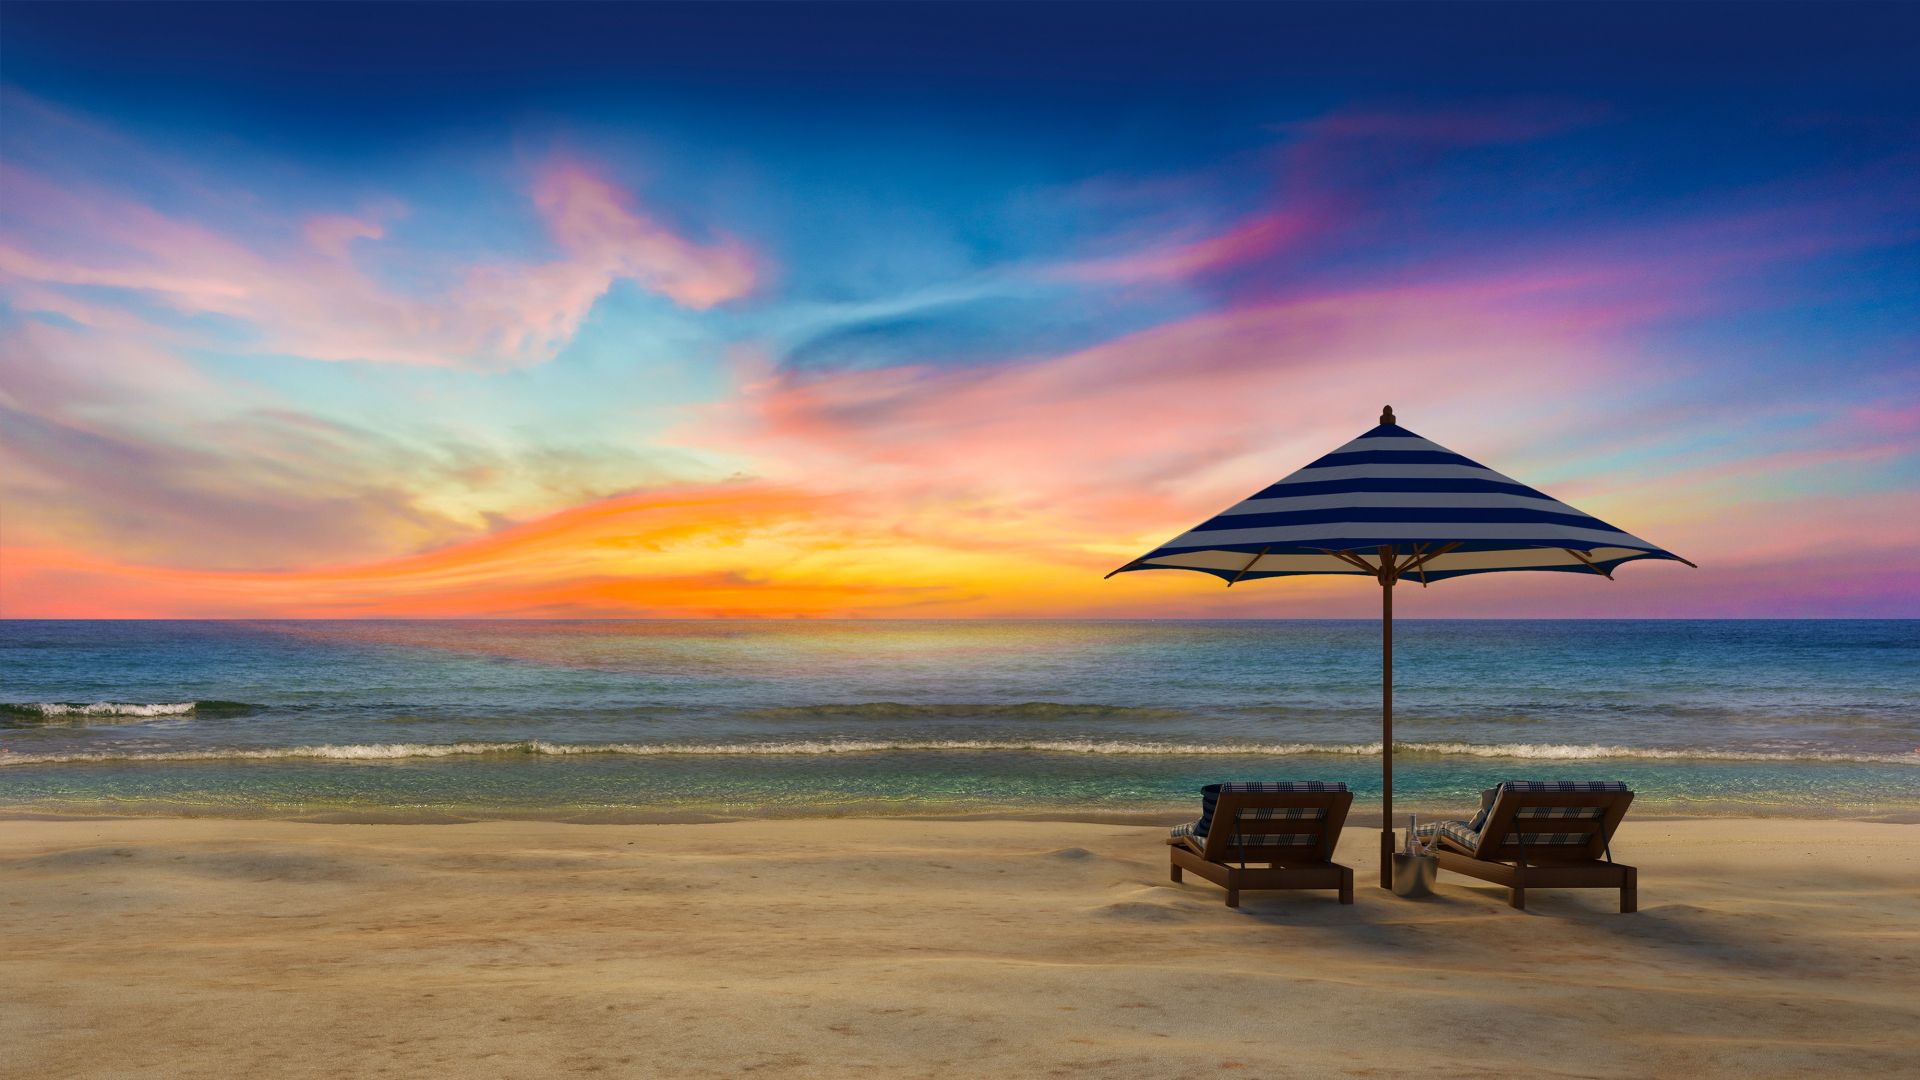 Two Adirondack chairs on the beach under a blue striped umbrella viewing a colorful pink, yellow and blue sunset